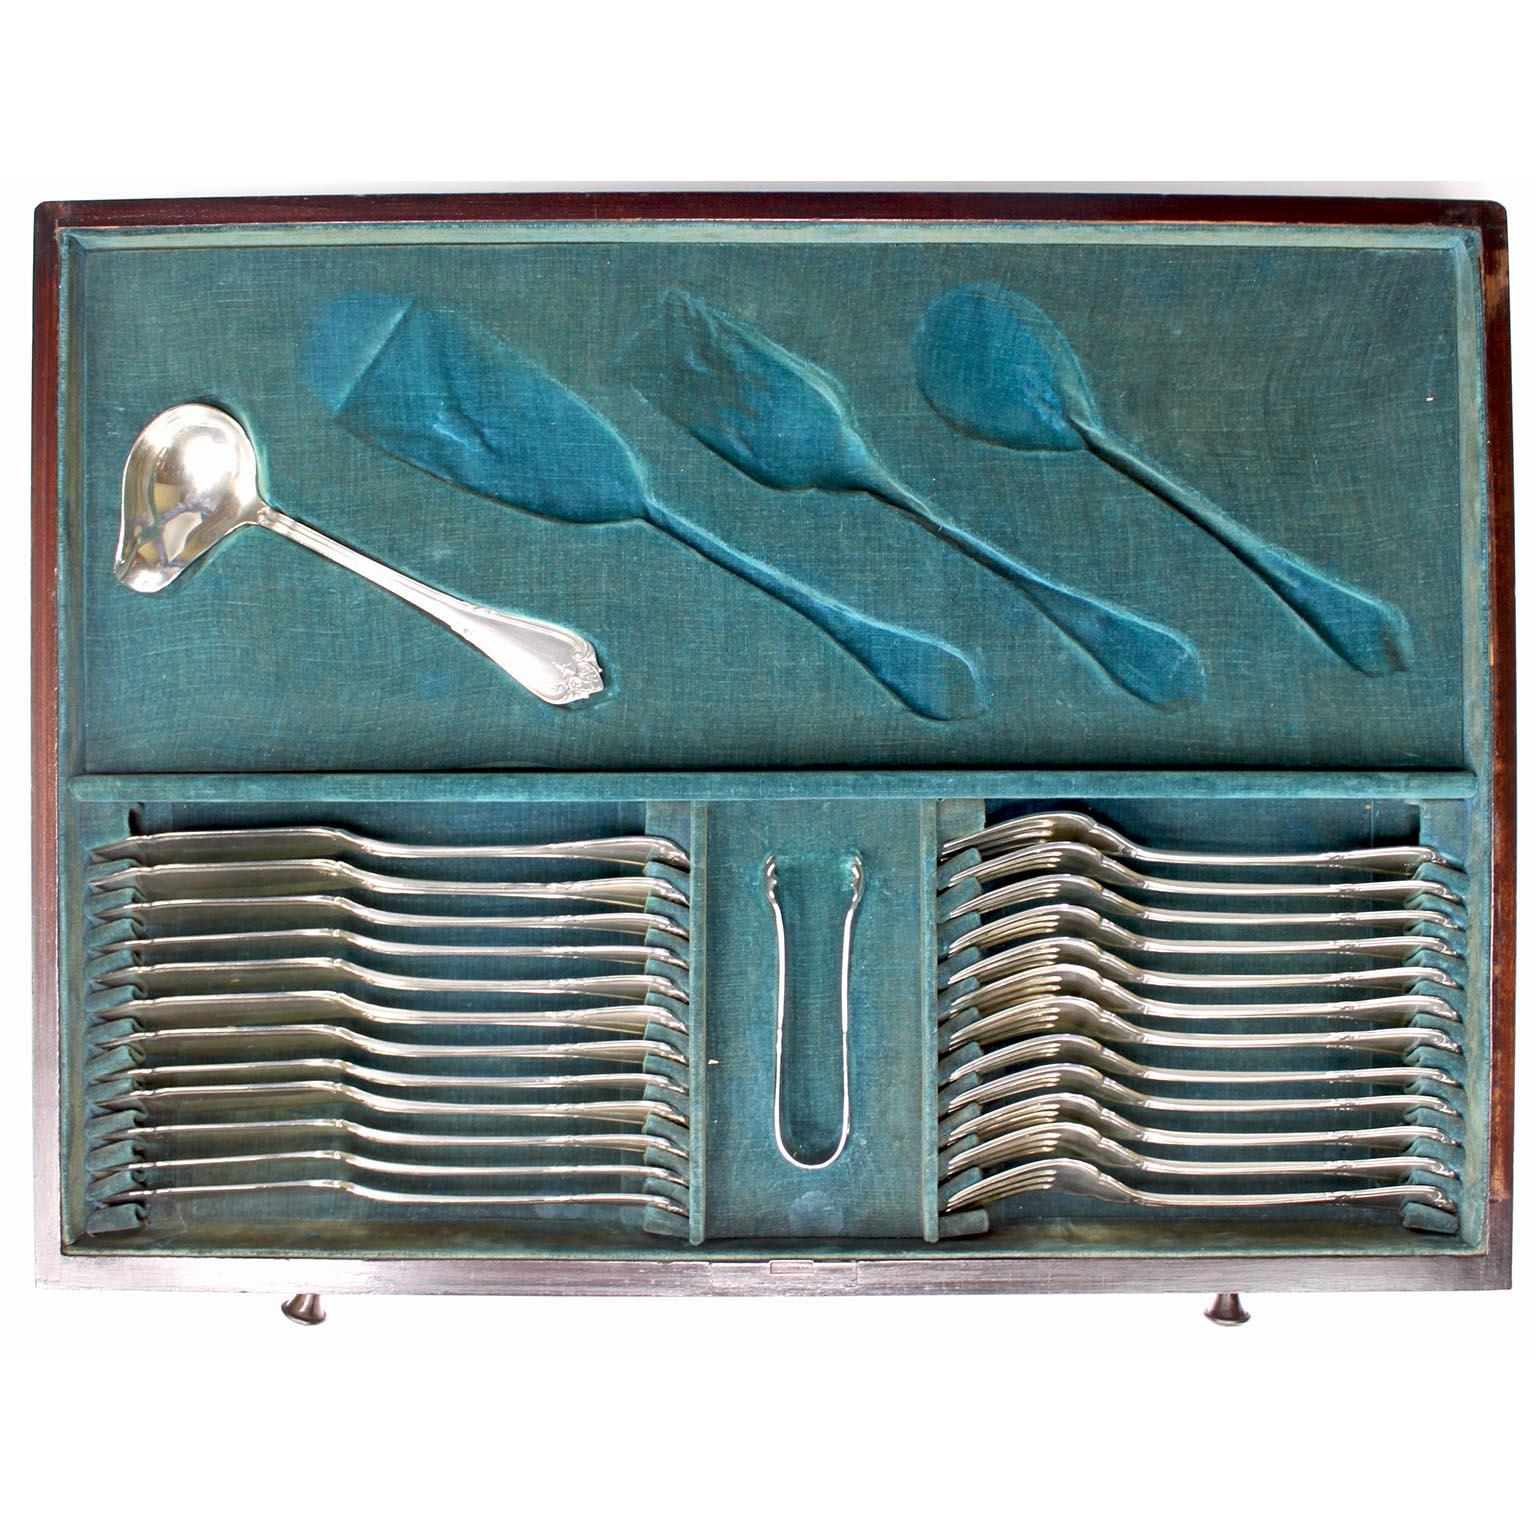 A Fine Early 20th Century 152 Piece Austrian Flatware Set by Berndorf Alpacca For Sale 6